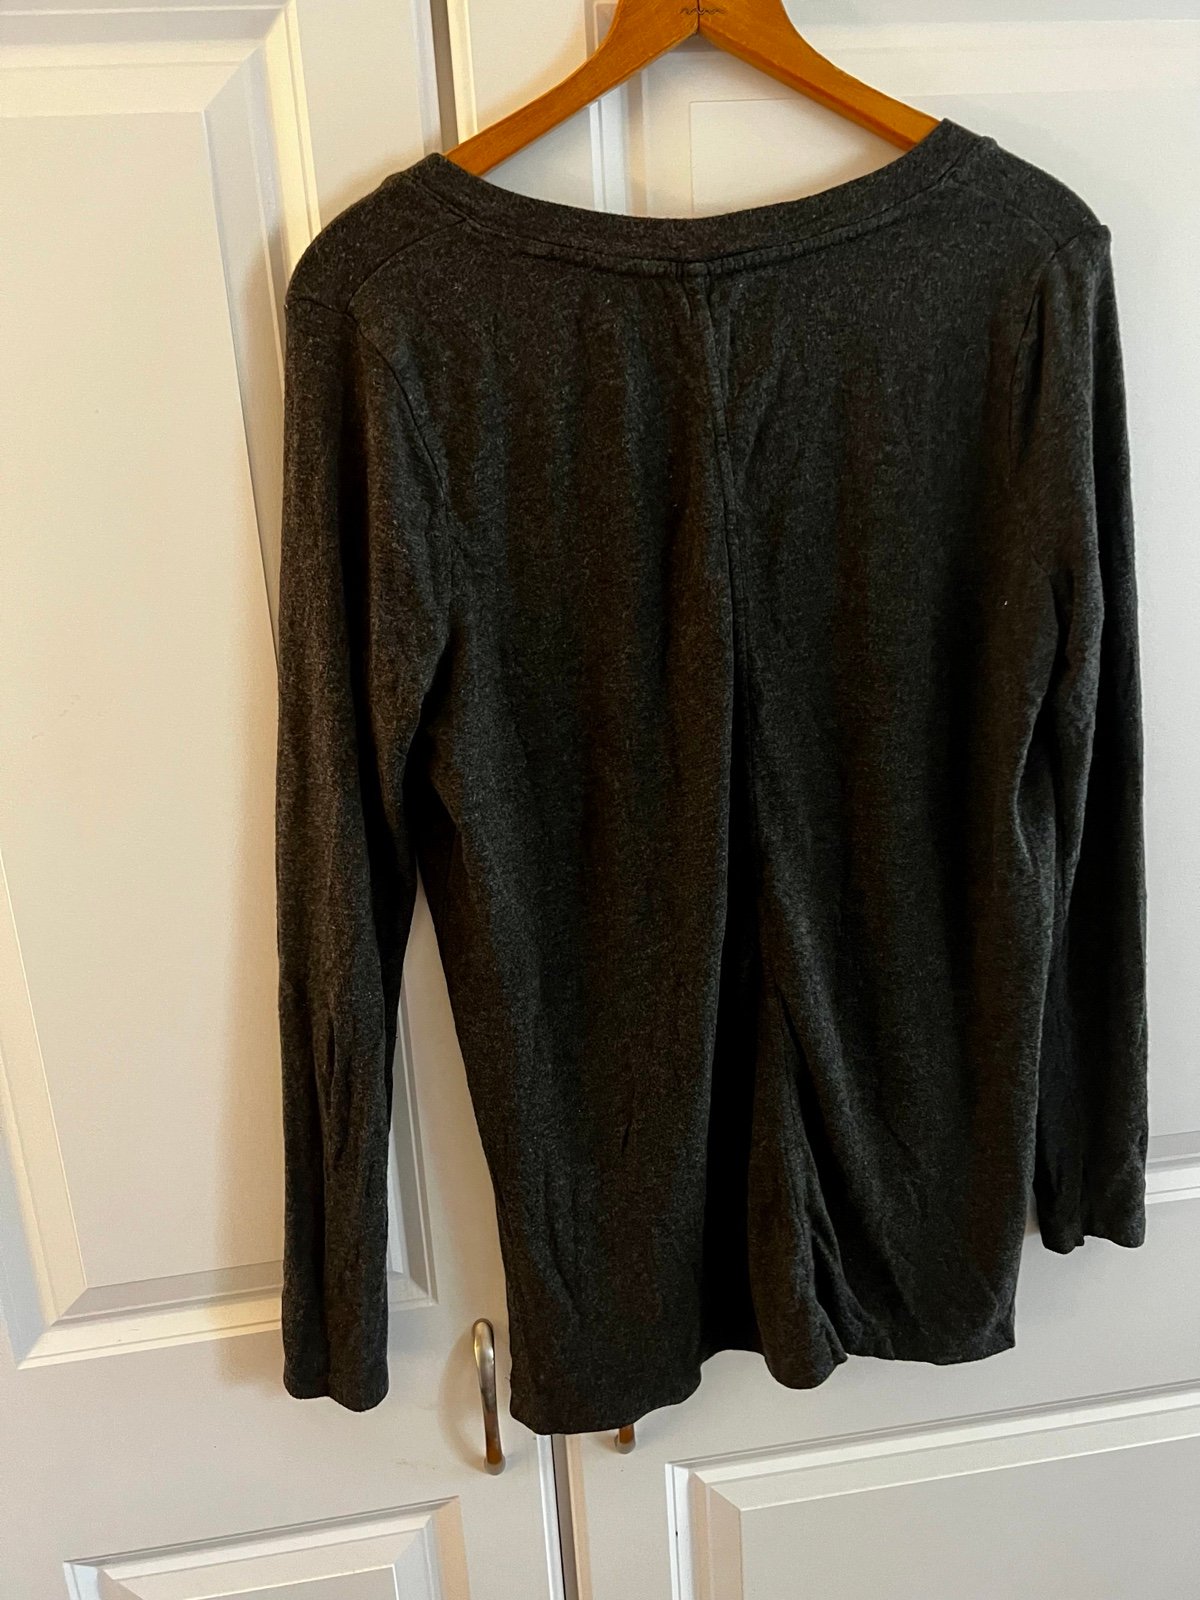 Promotions  Lou & grey  knit V neck sweater, small KzSLYpW4L Buying Cheap